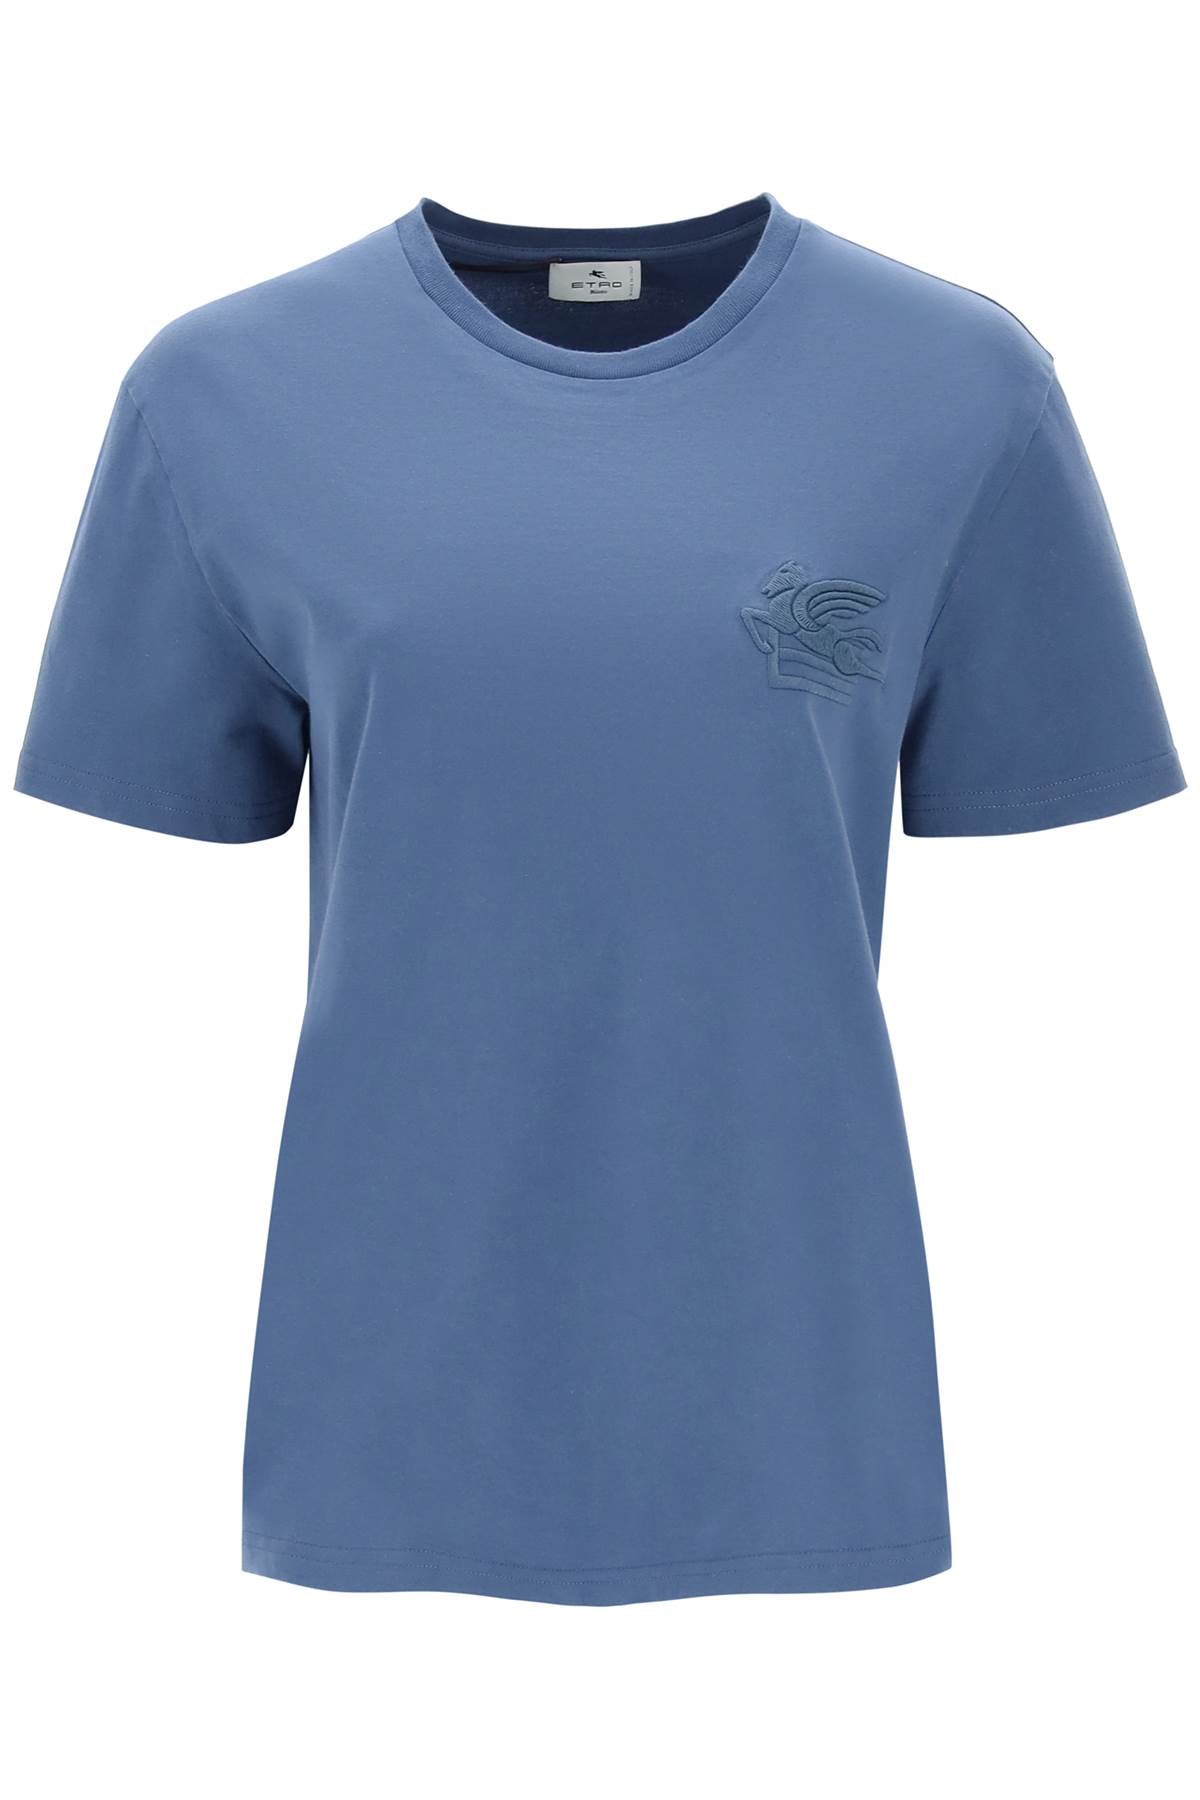 Etro t-shirt with pegasus embroidery-0